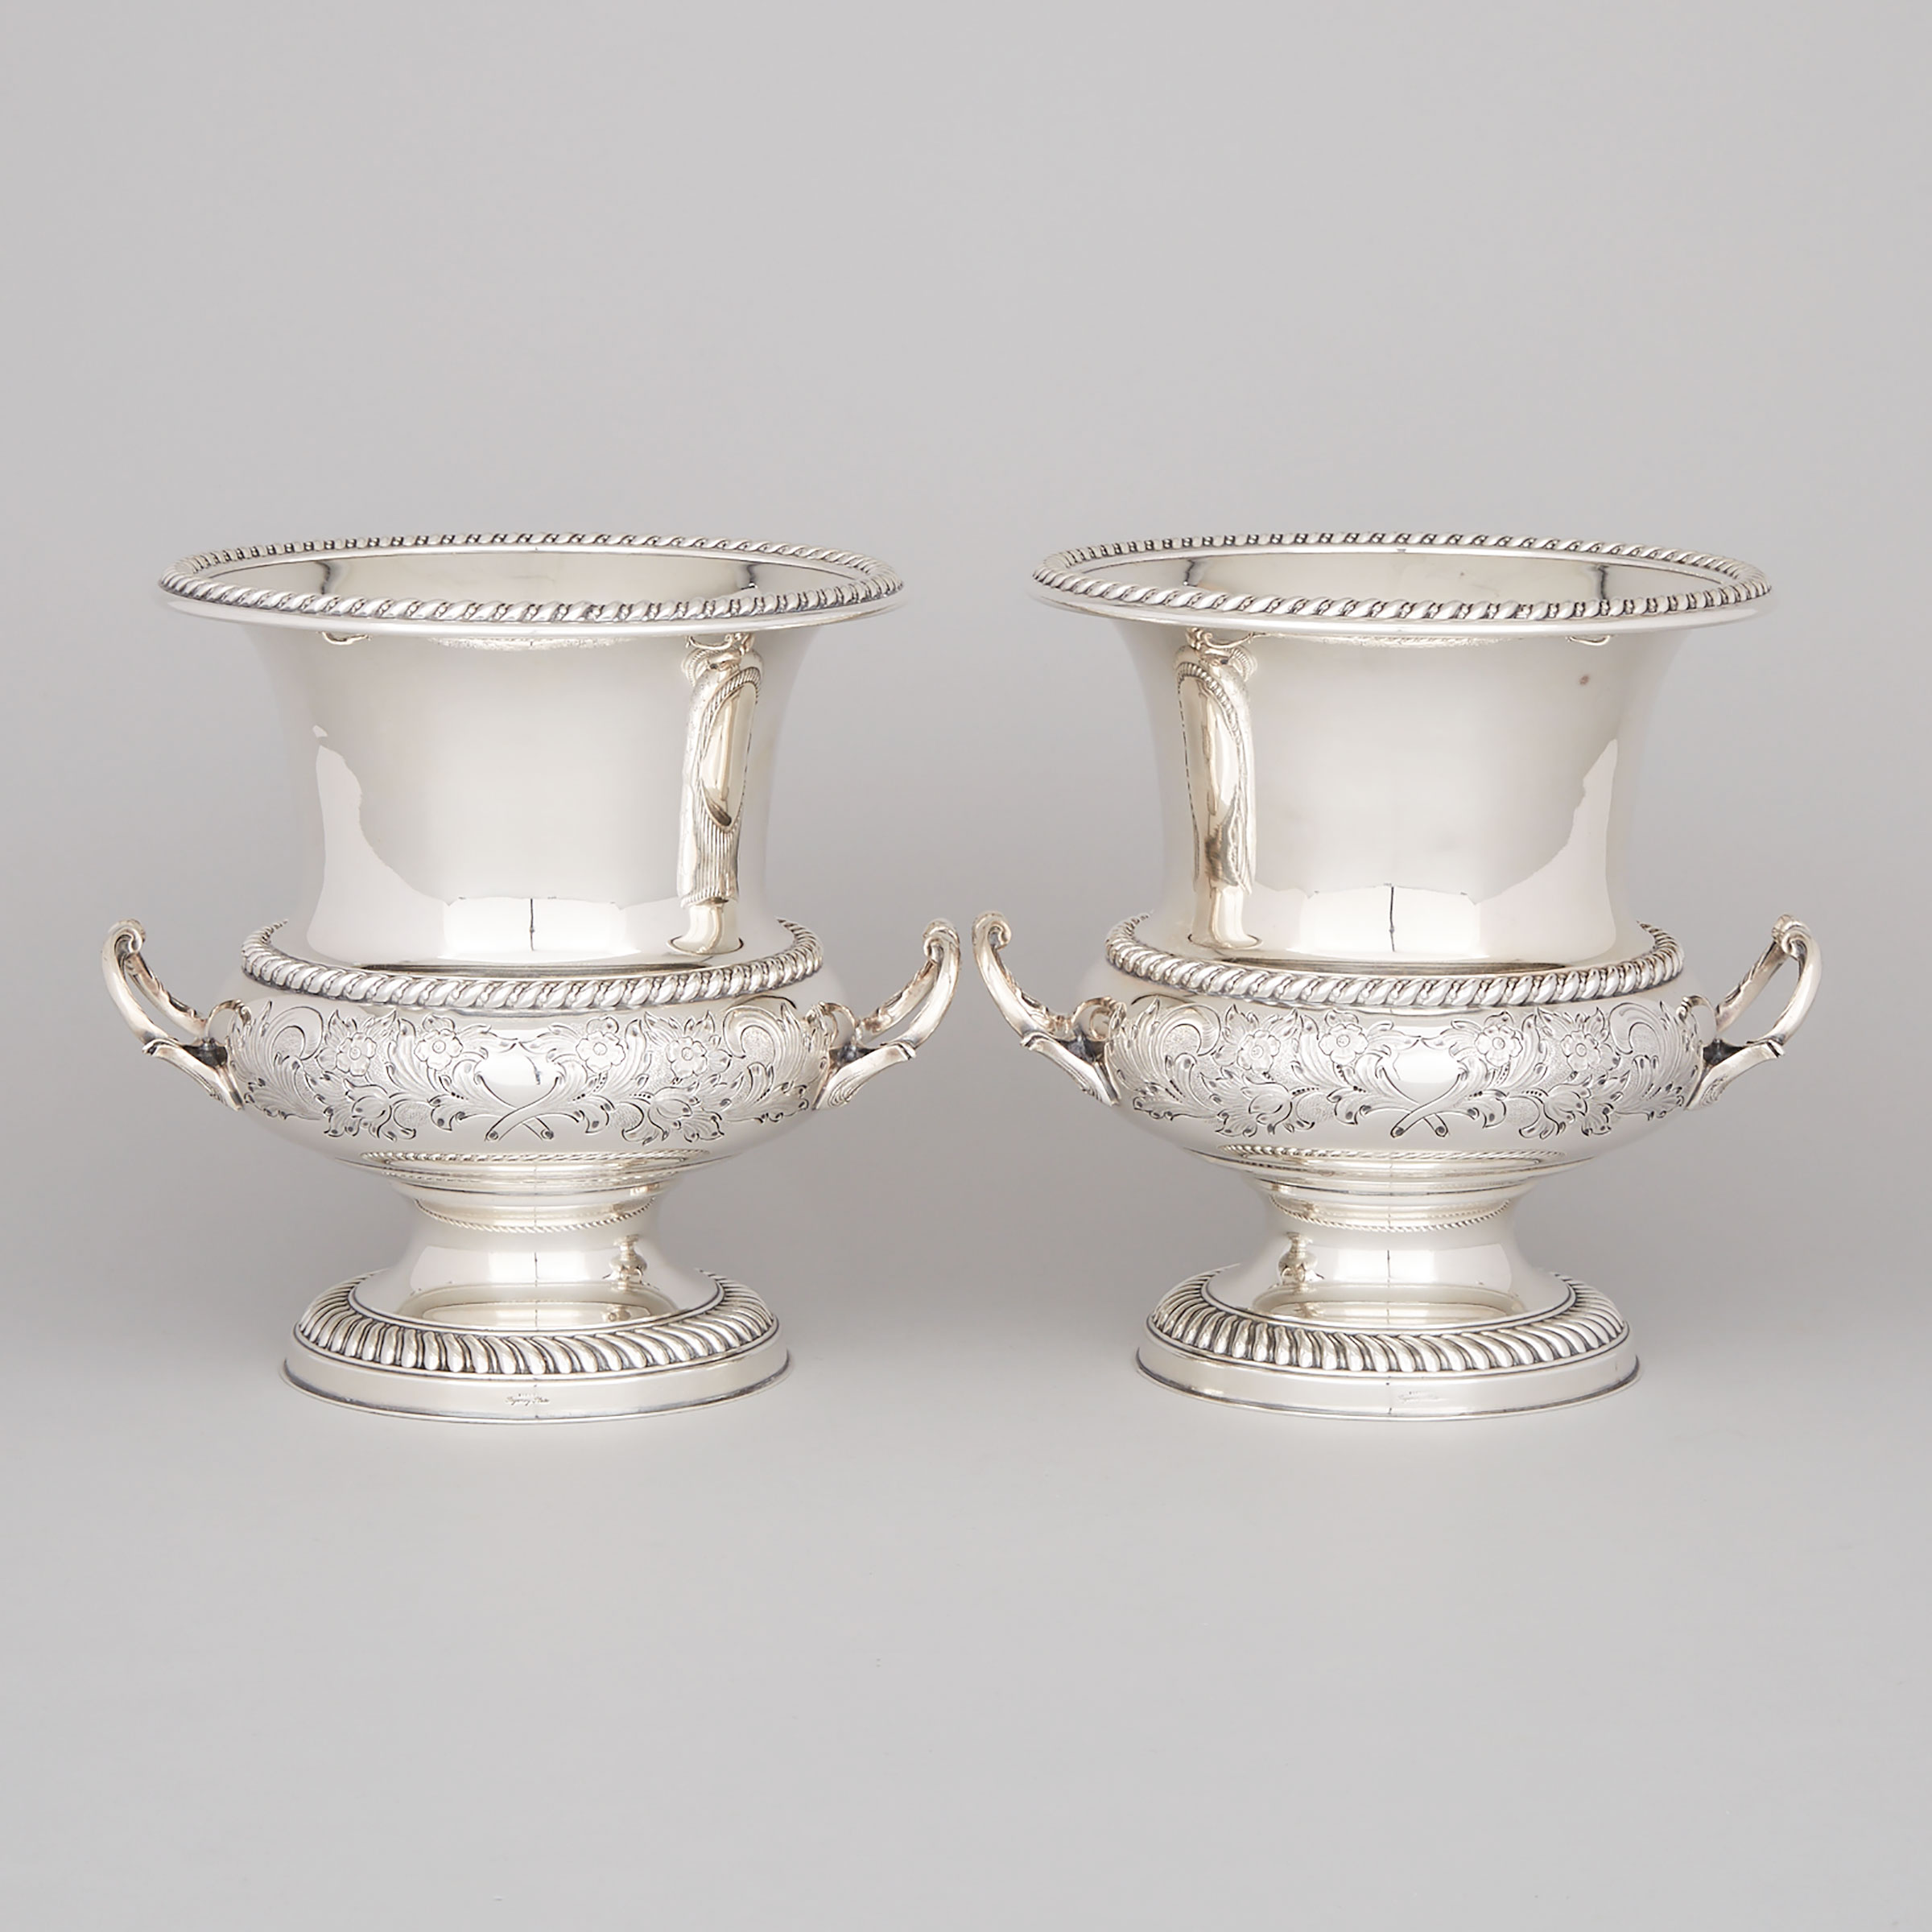 Pair of English ‘Regency’ Silver Plated Wine Coolers, for Henry Birks & Sons, 20th century